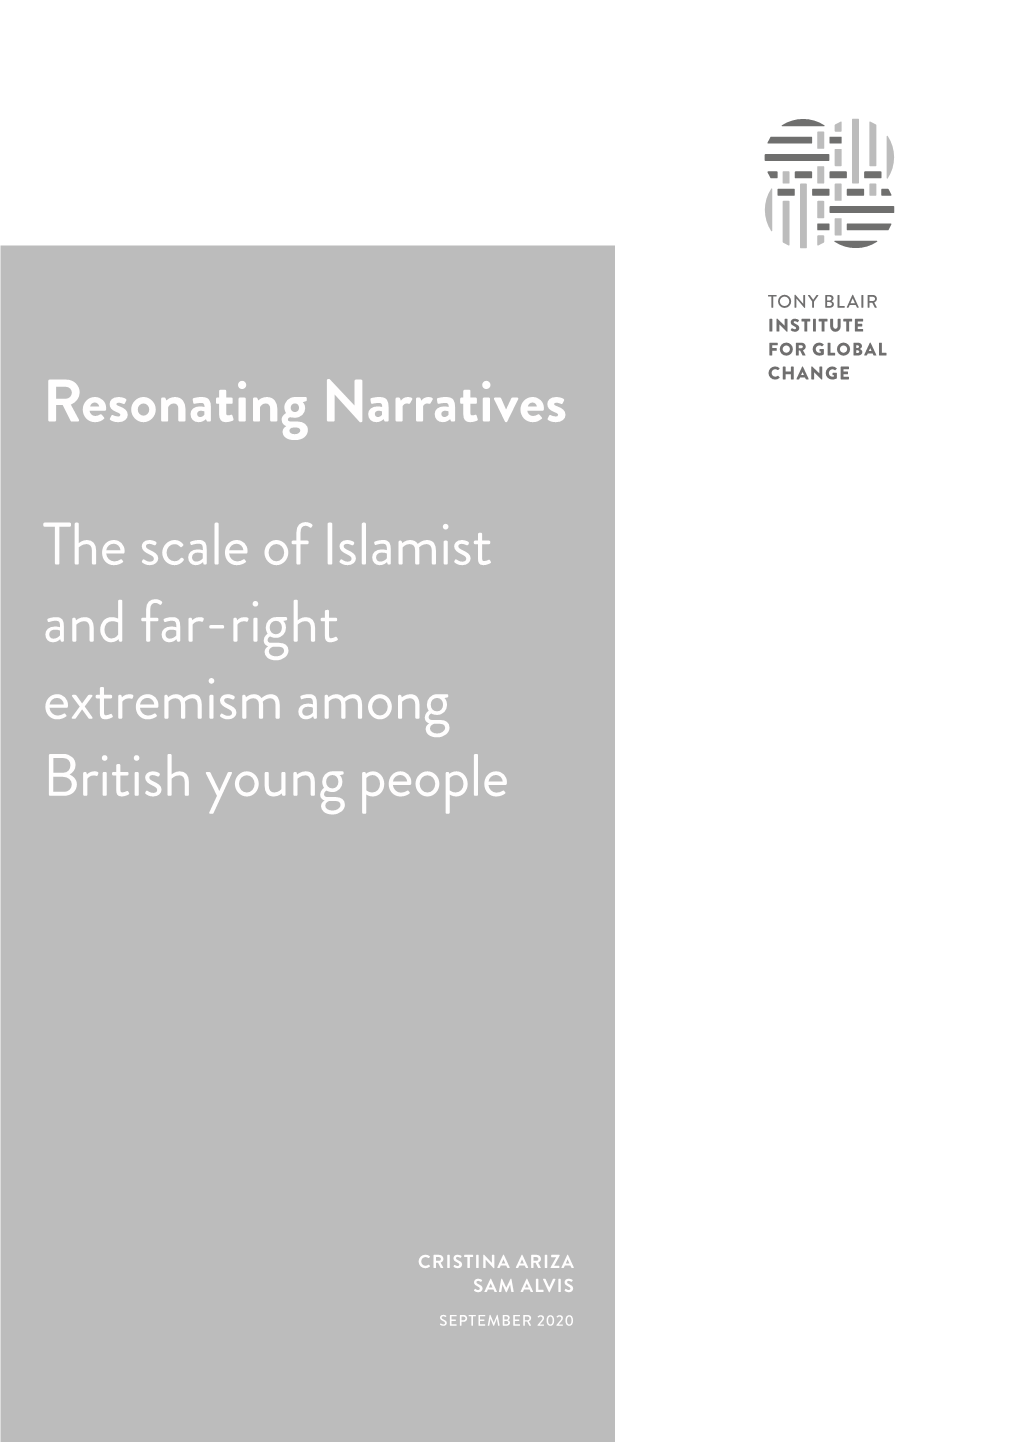 Resonating Narratives the Scale of Islamist and Far-Right Extremism